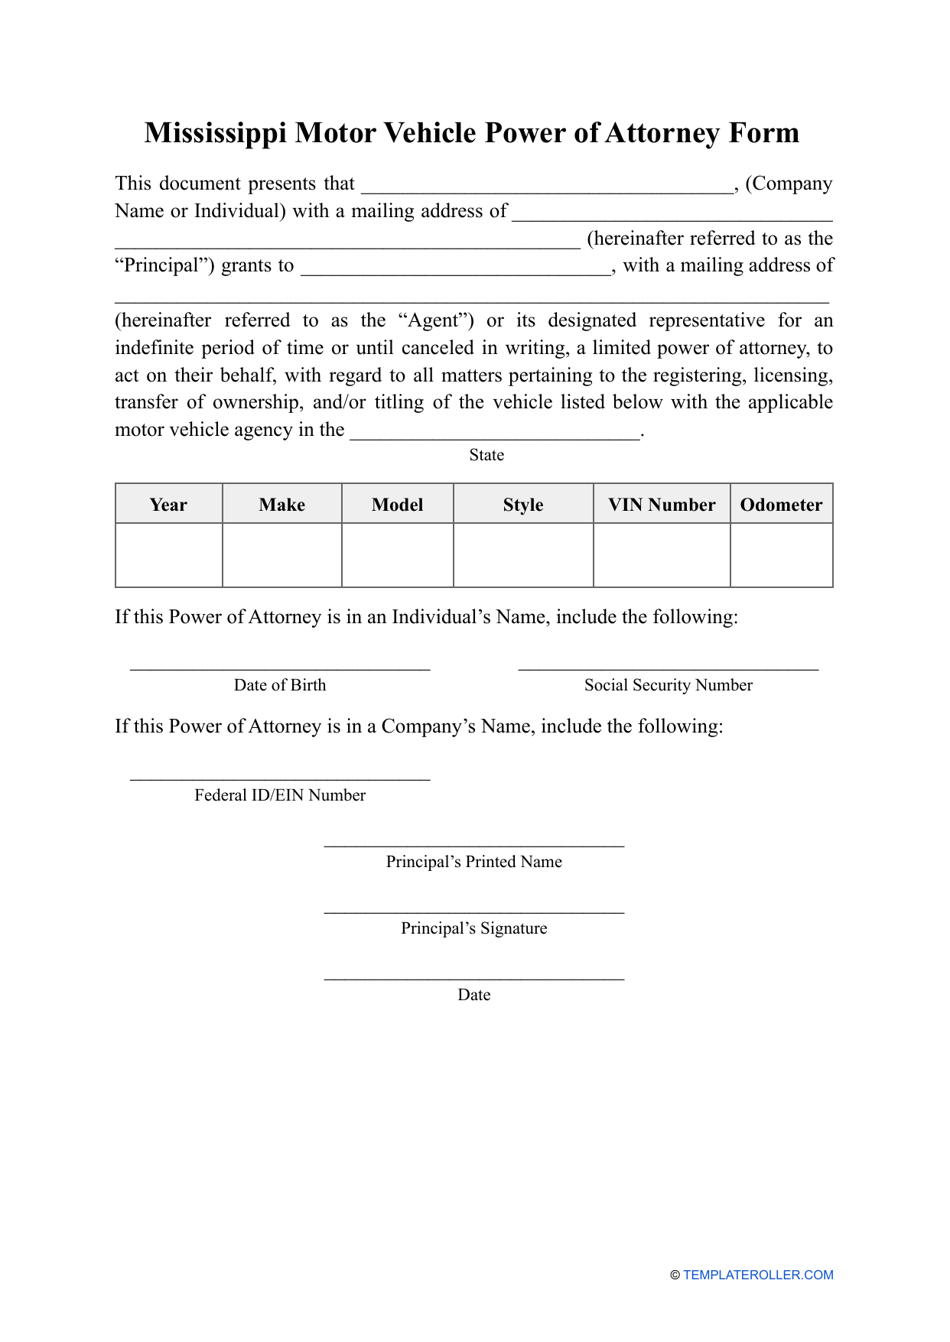 Motor Vehicle Power of Attorney Form - Mississippi, Page 1